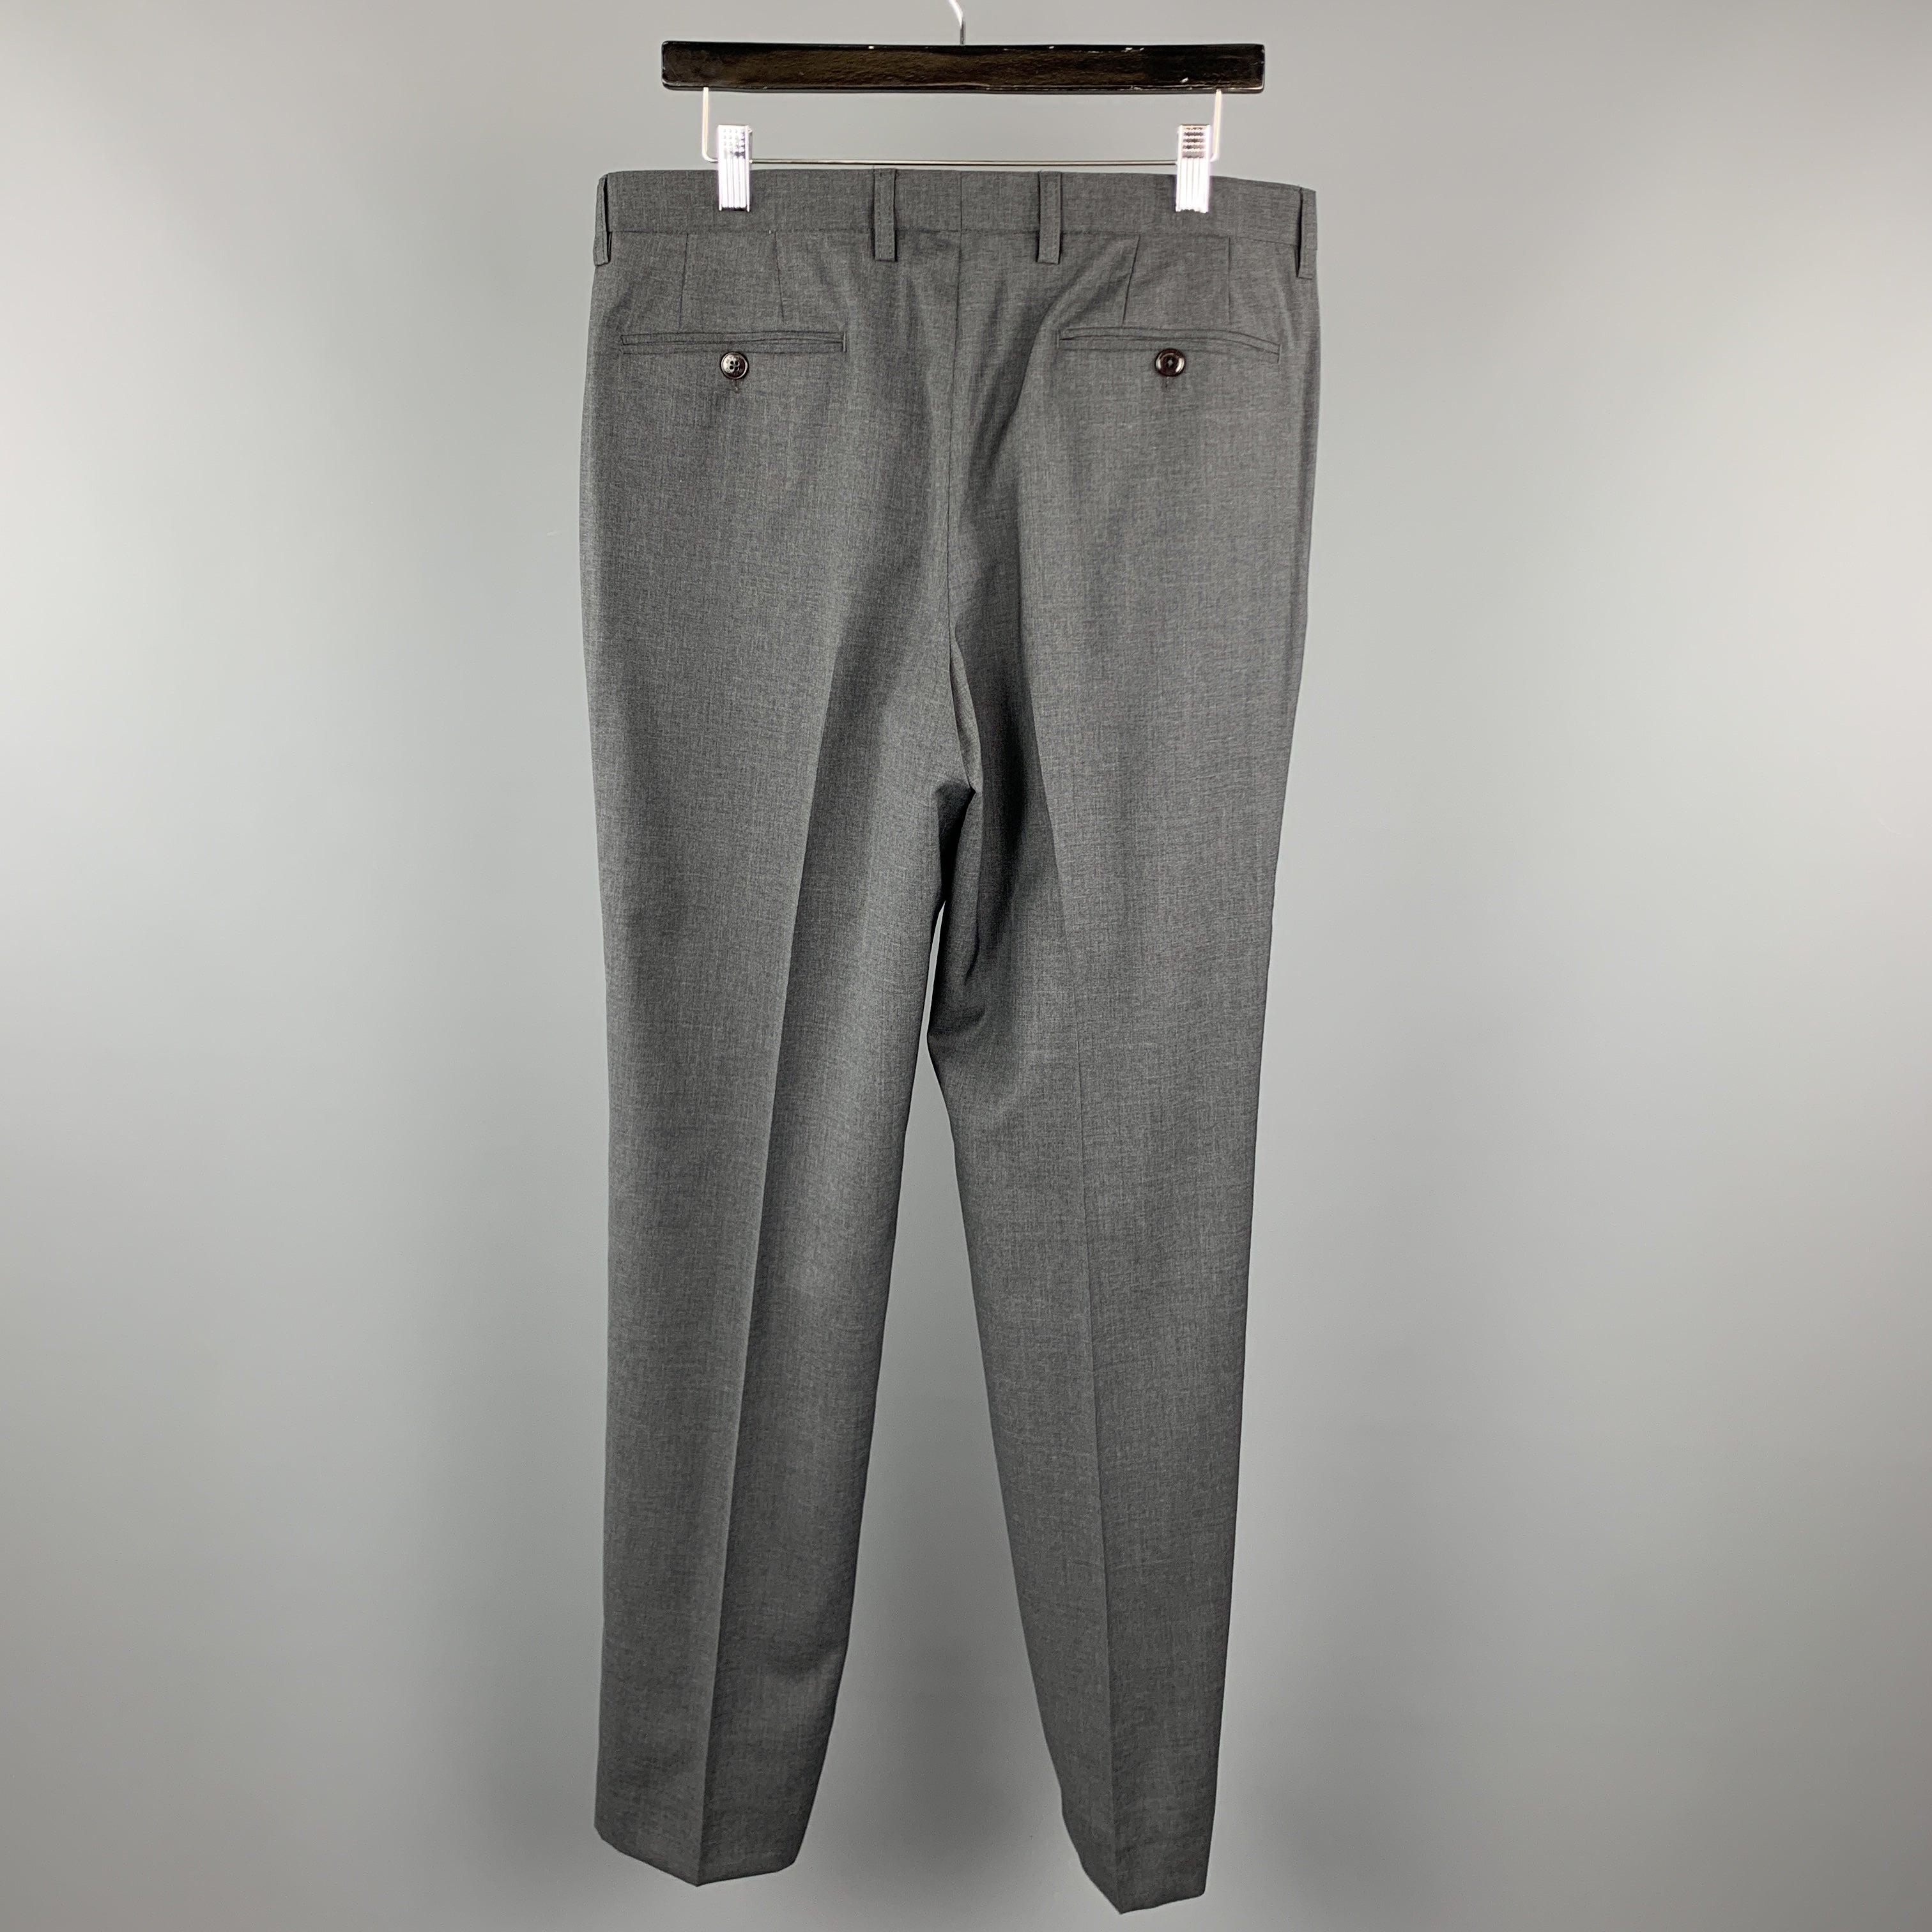 ETRO Size 34 x 35 Dark Gray Lana Wool Dress Pants In Excellent Condition For Sale In San Francisco, CA